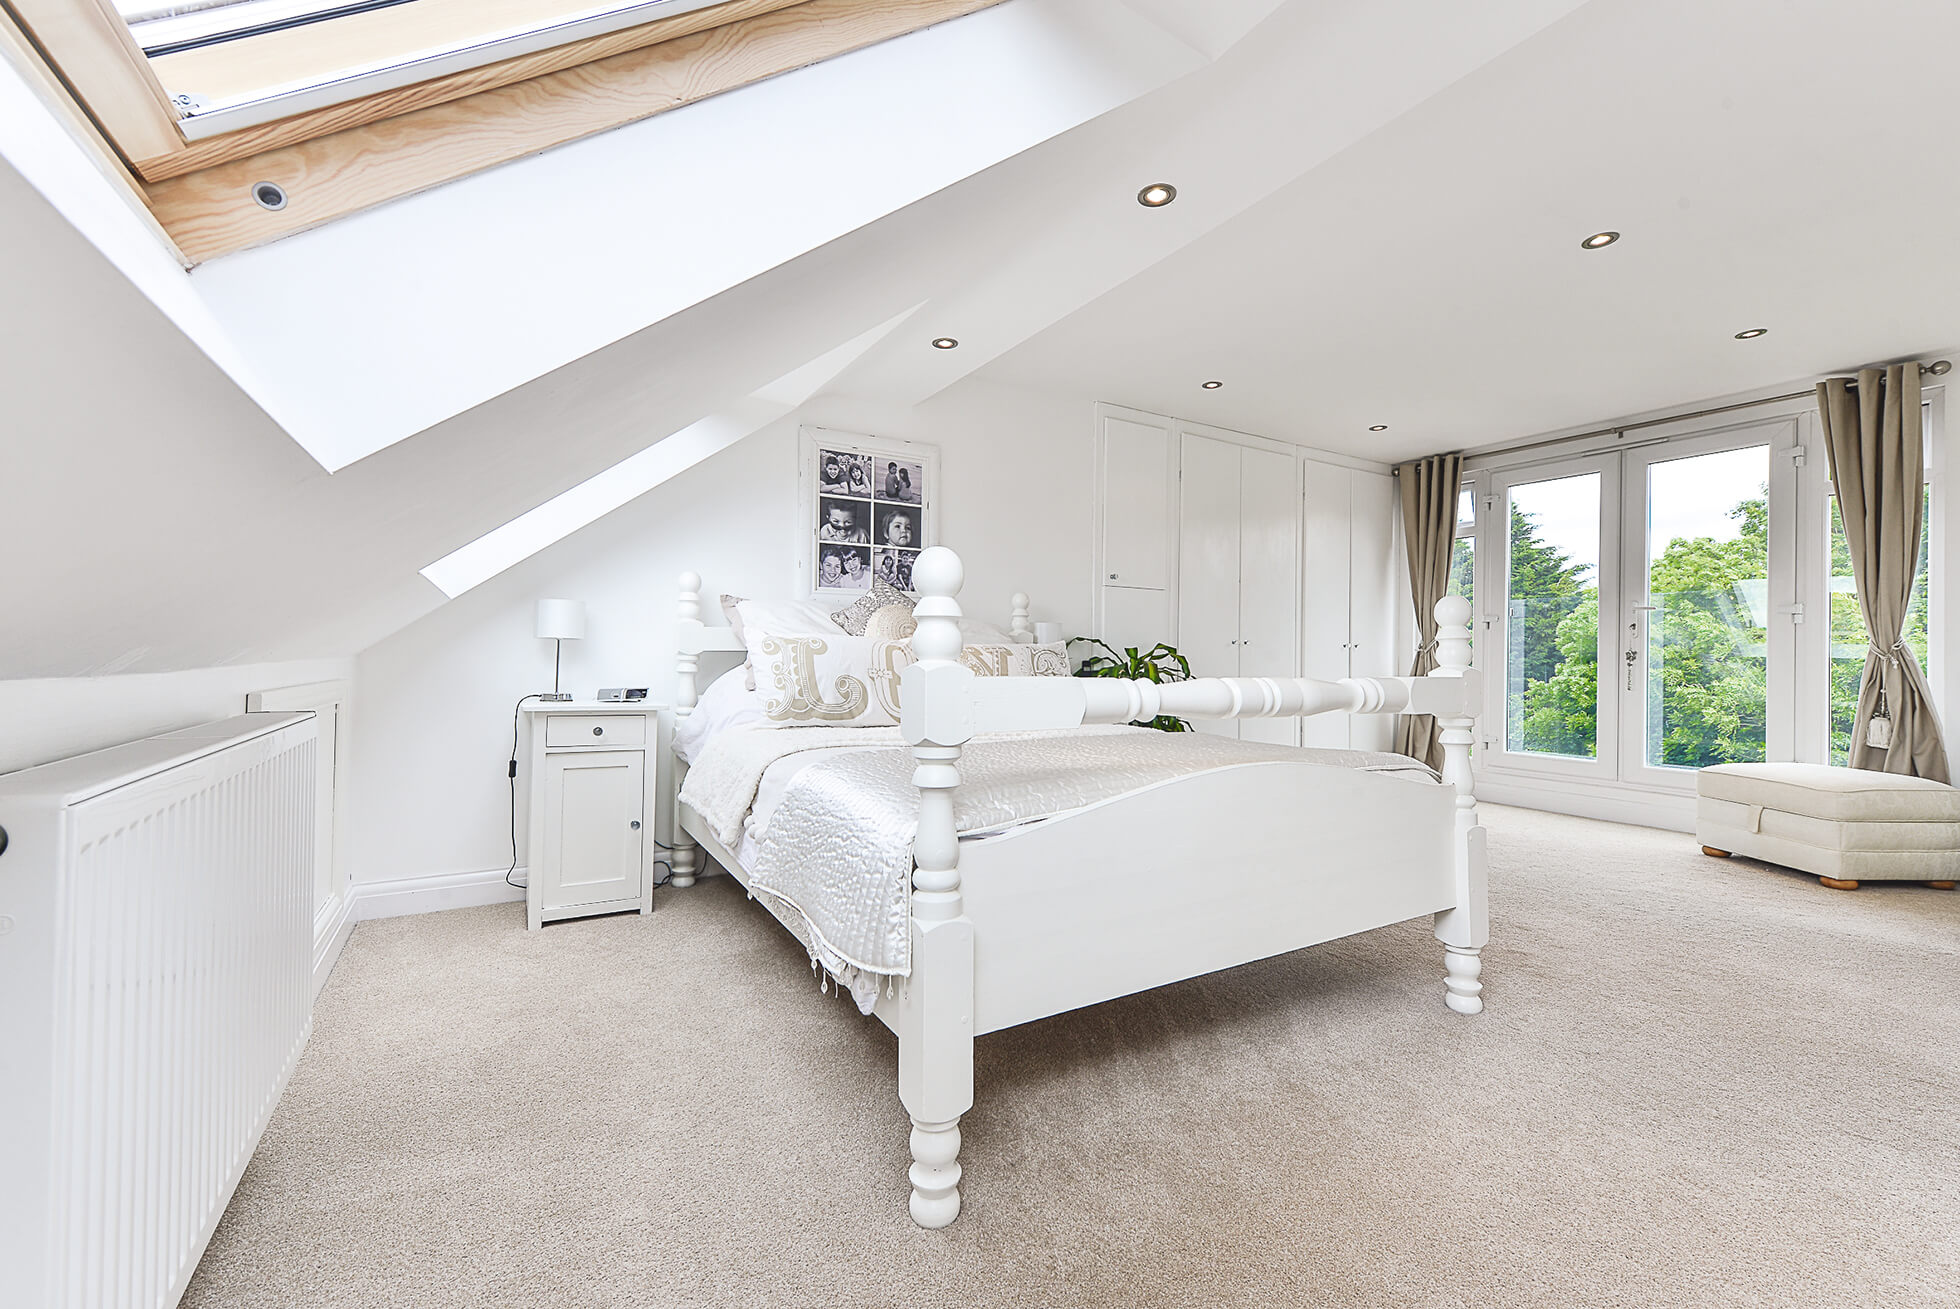 Do you have a question about converting your Loft in Rickmansworth? Here are the most popular questions asked by our clients.